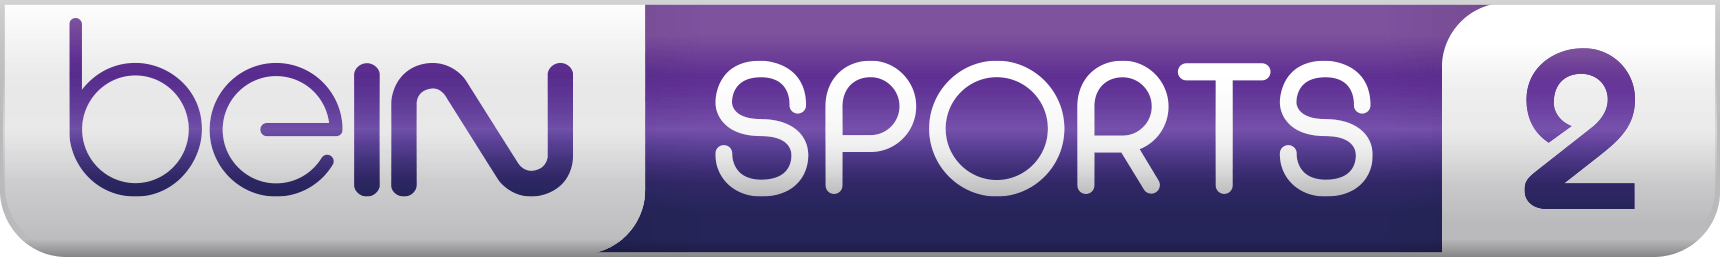 Bein Sports Logo PNG - 178460